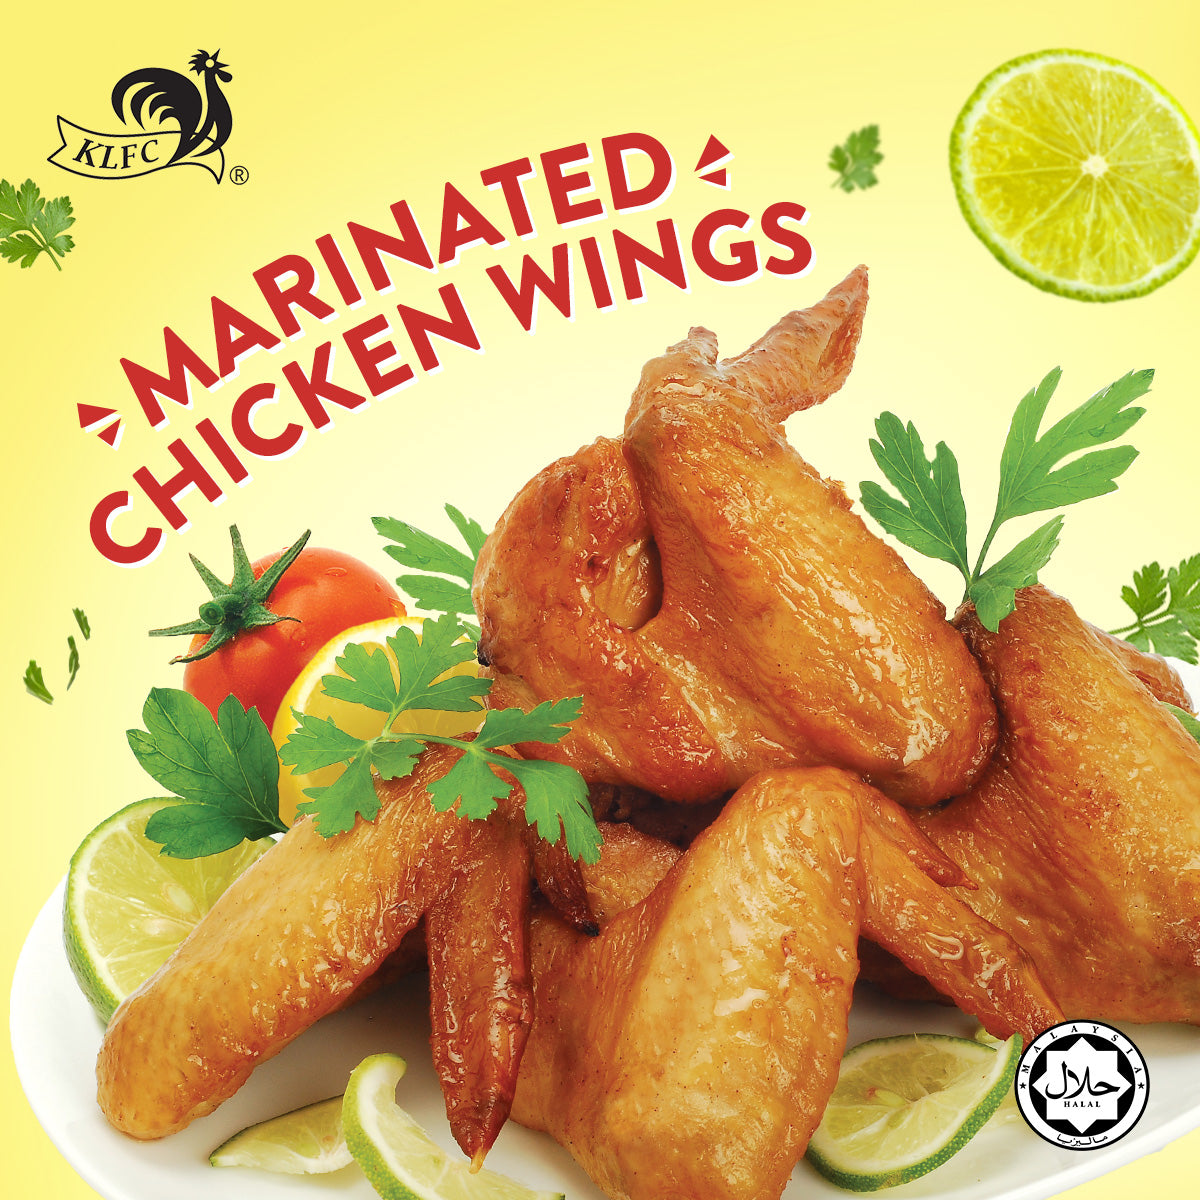 MARINATED CHICKEN WINGS 800G